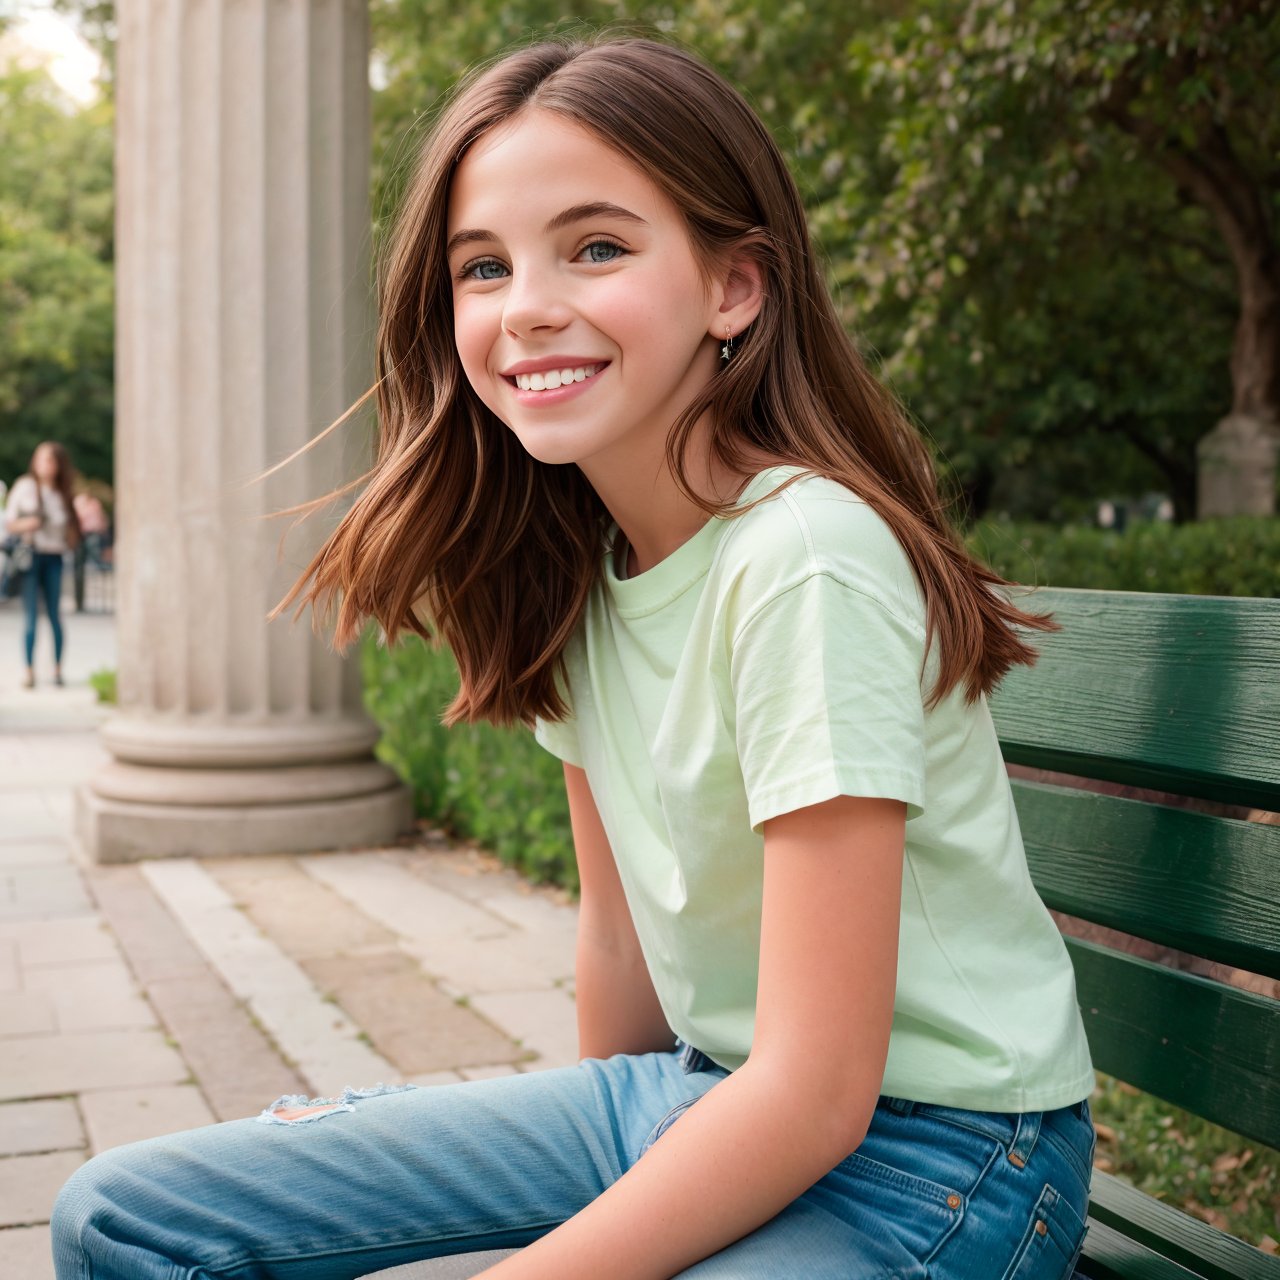 (masterpiece:1.3), wallpaper, view from below, full body portrait of smiling (AIDA_LoRA_arusso:1.1) <lora:AIDA_LoRA_arusso:0.78> wearing a simple green t-shirt and jeans sitting on the bench in the park, little girl, pretty face, naughty, funny, happy, playful, intimate, flirting with camera, dramatic, hyper realistic, studio photo, kkw-ph1, (colorful:1.1)